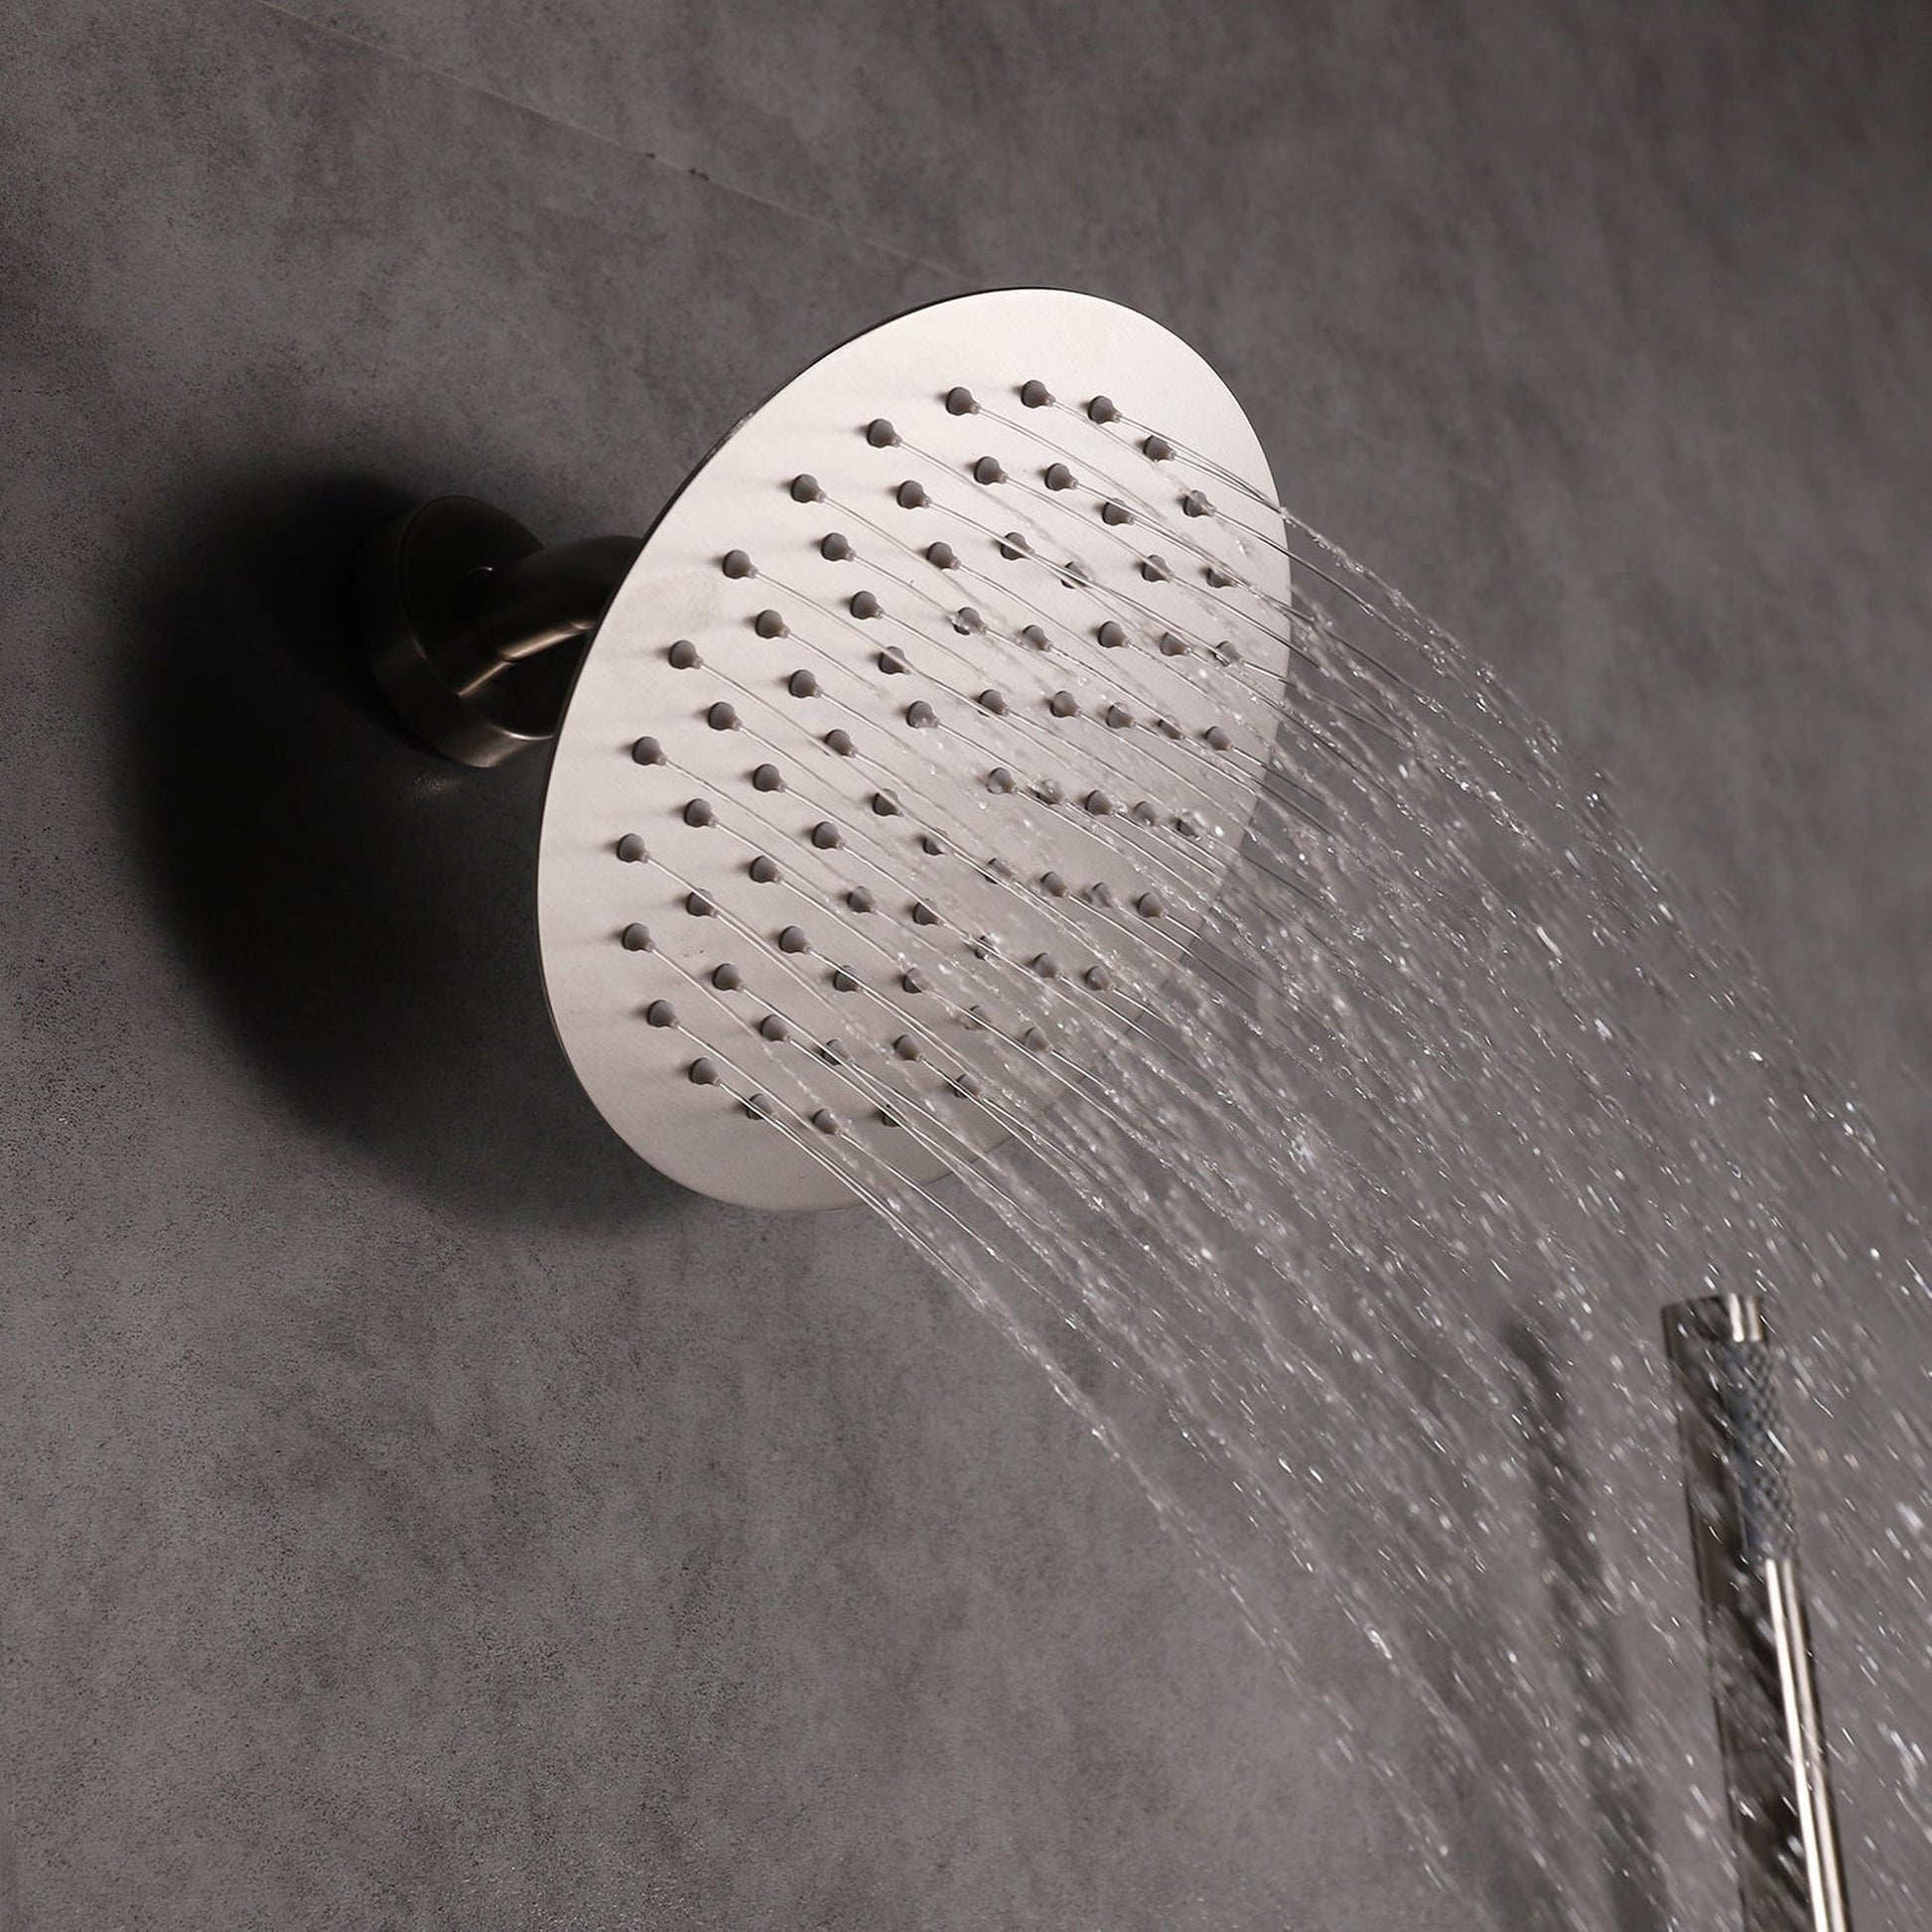 Eviva Splash Brushed Nickel Wall-Mounted Round Shower Head With Hand Shower and Tub Faucet